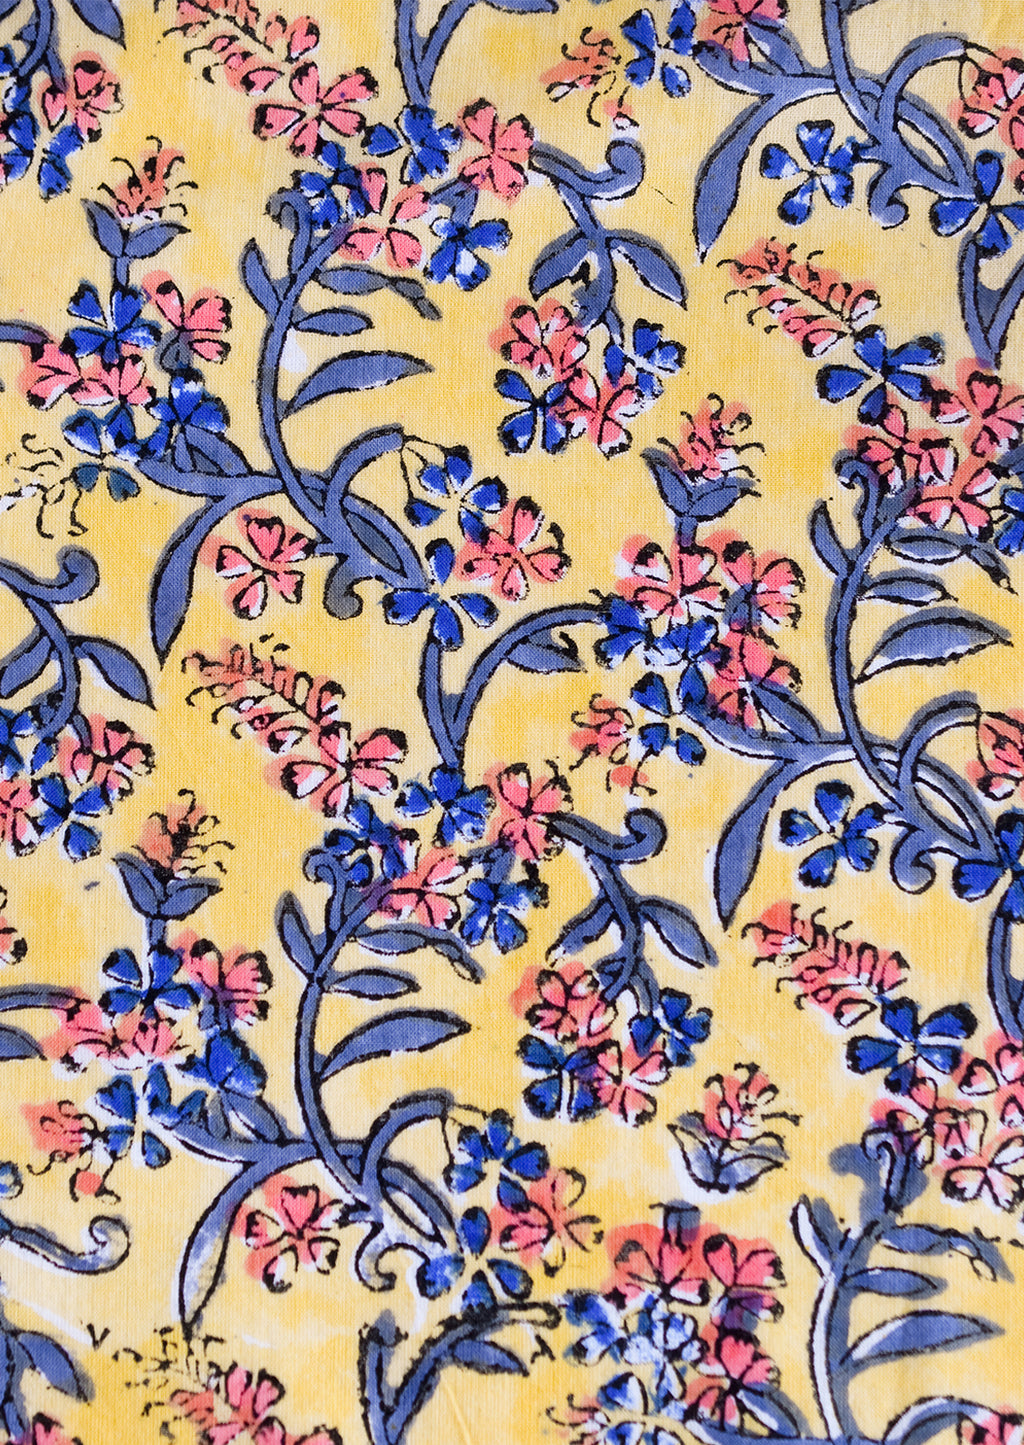 4: A block printed throw pillow in yellow with blue and pink floral print.